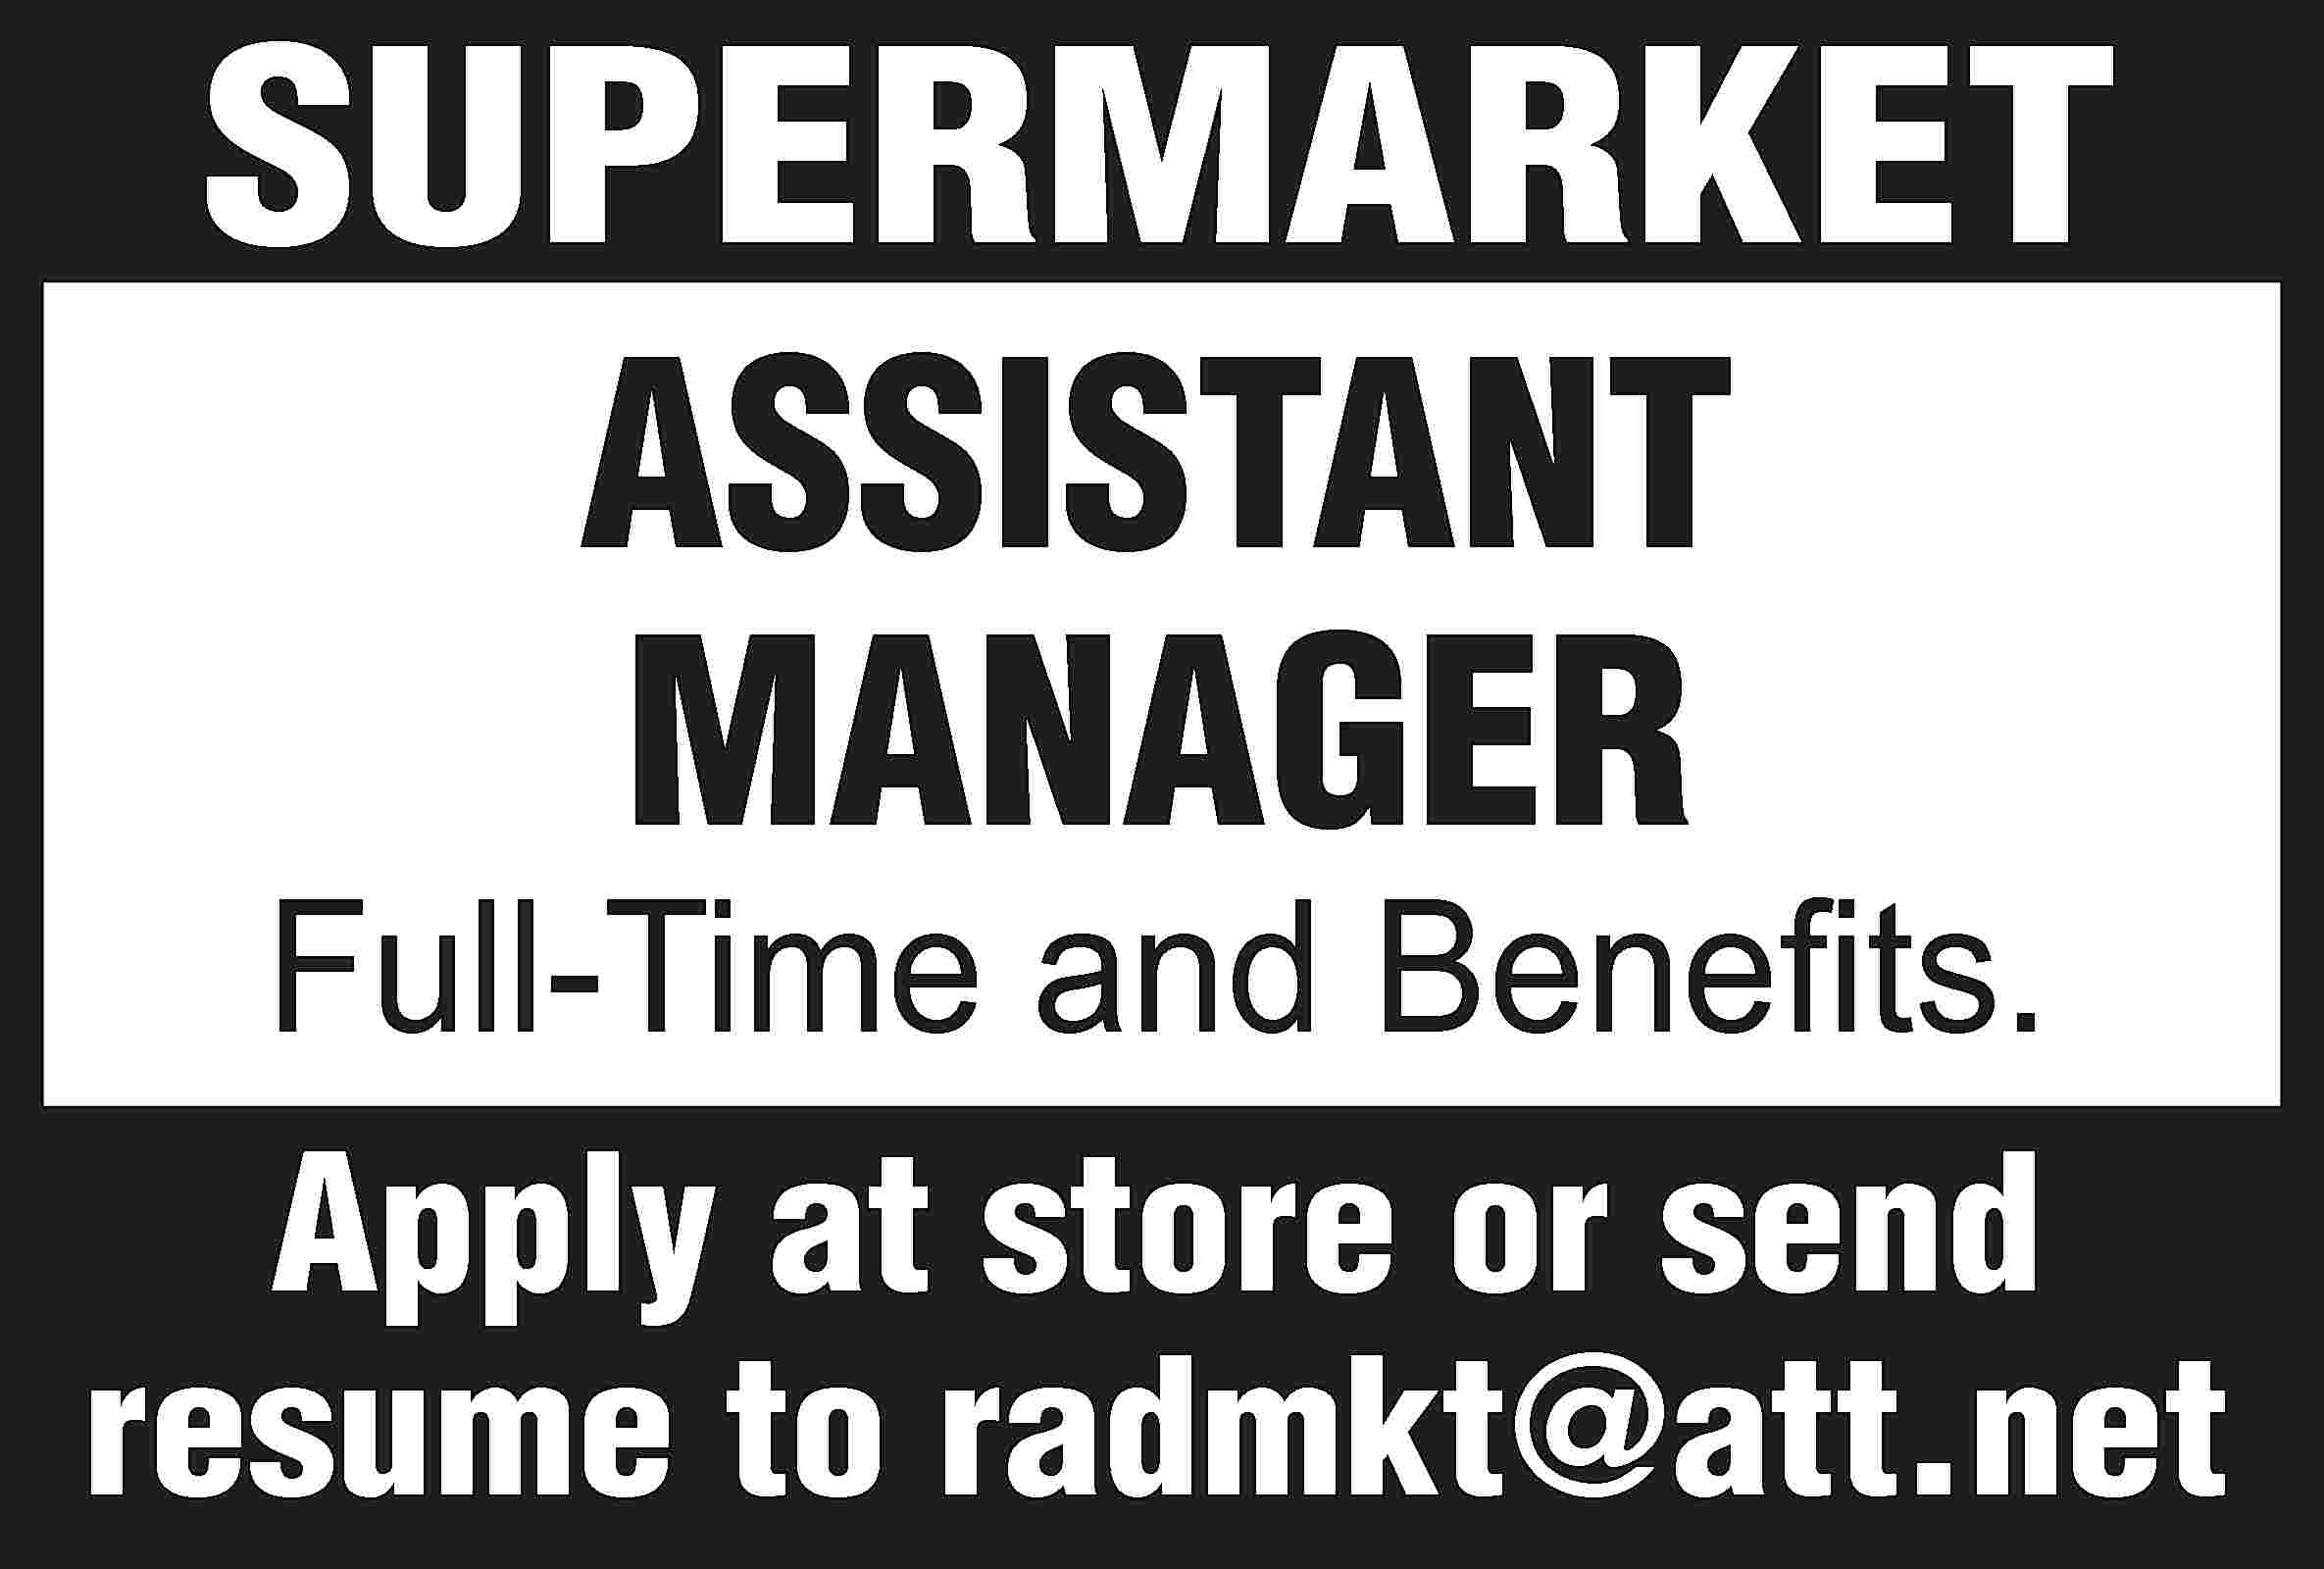 SUPERMARKET ASSISTANT MANAGER Full-Time and  SUPERMARKET ASSISTANT MANAGER Full-Time and Benefits. Apply at store or send resume to radmkt@att.net